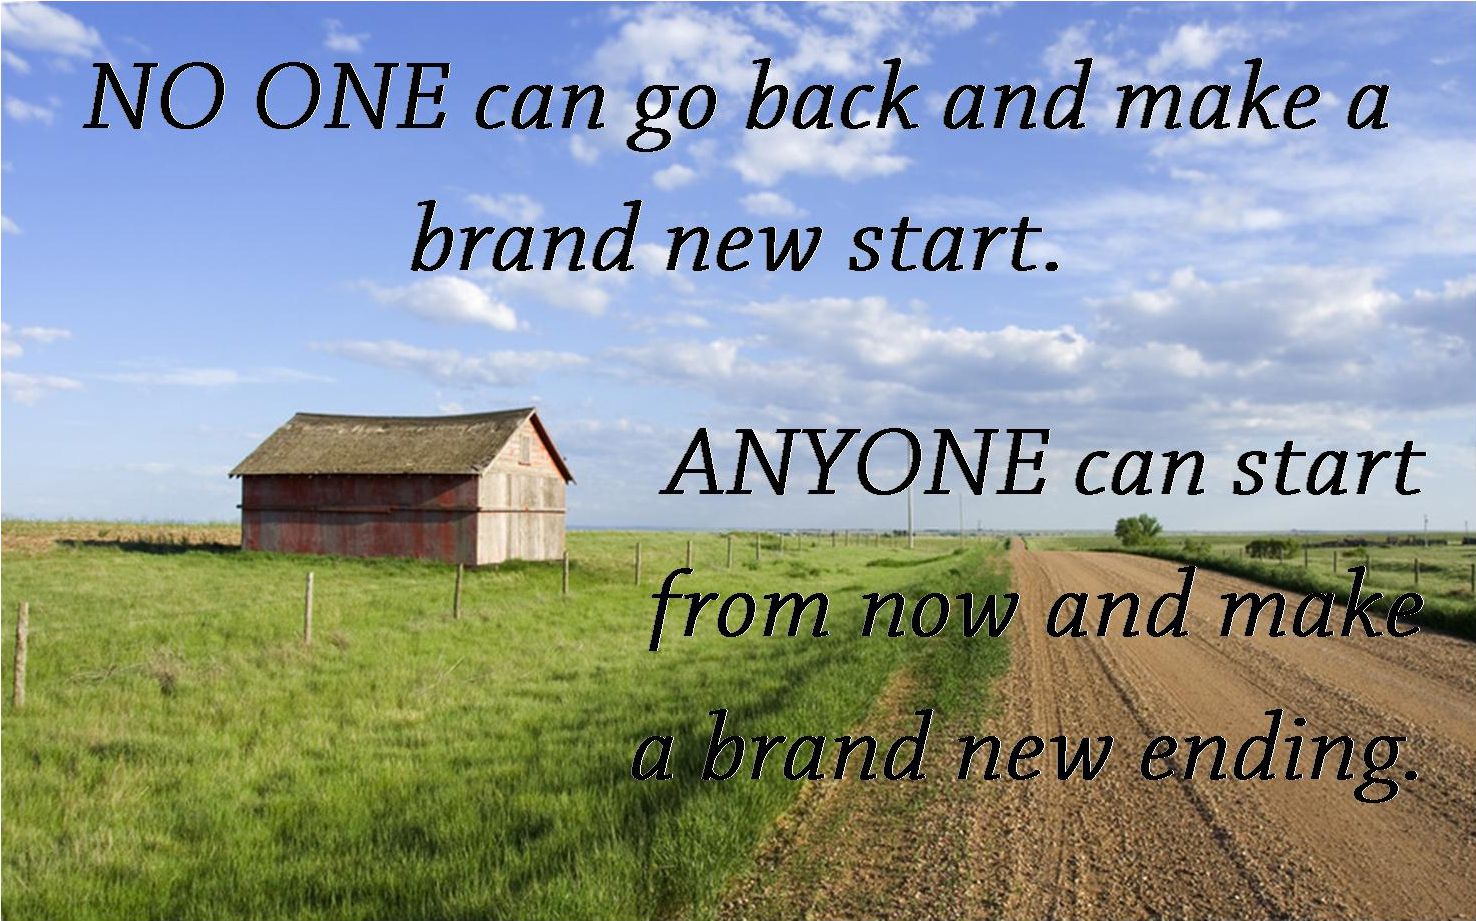 No one can go back and make a brand new start quote...